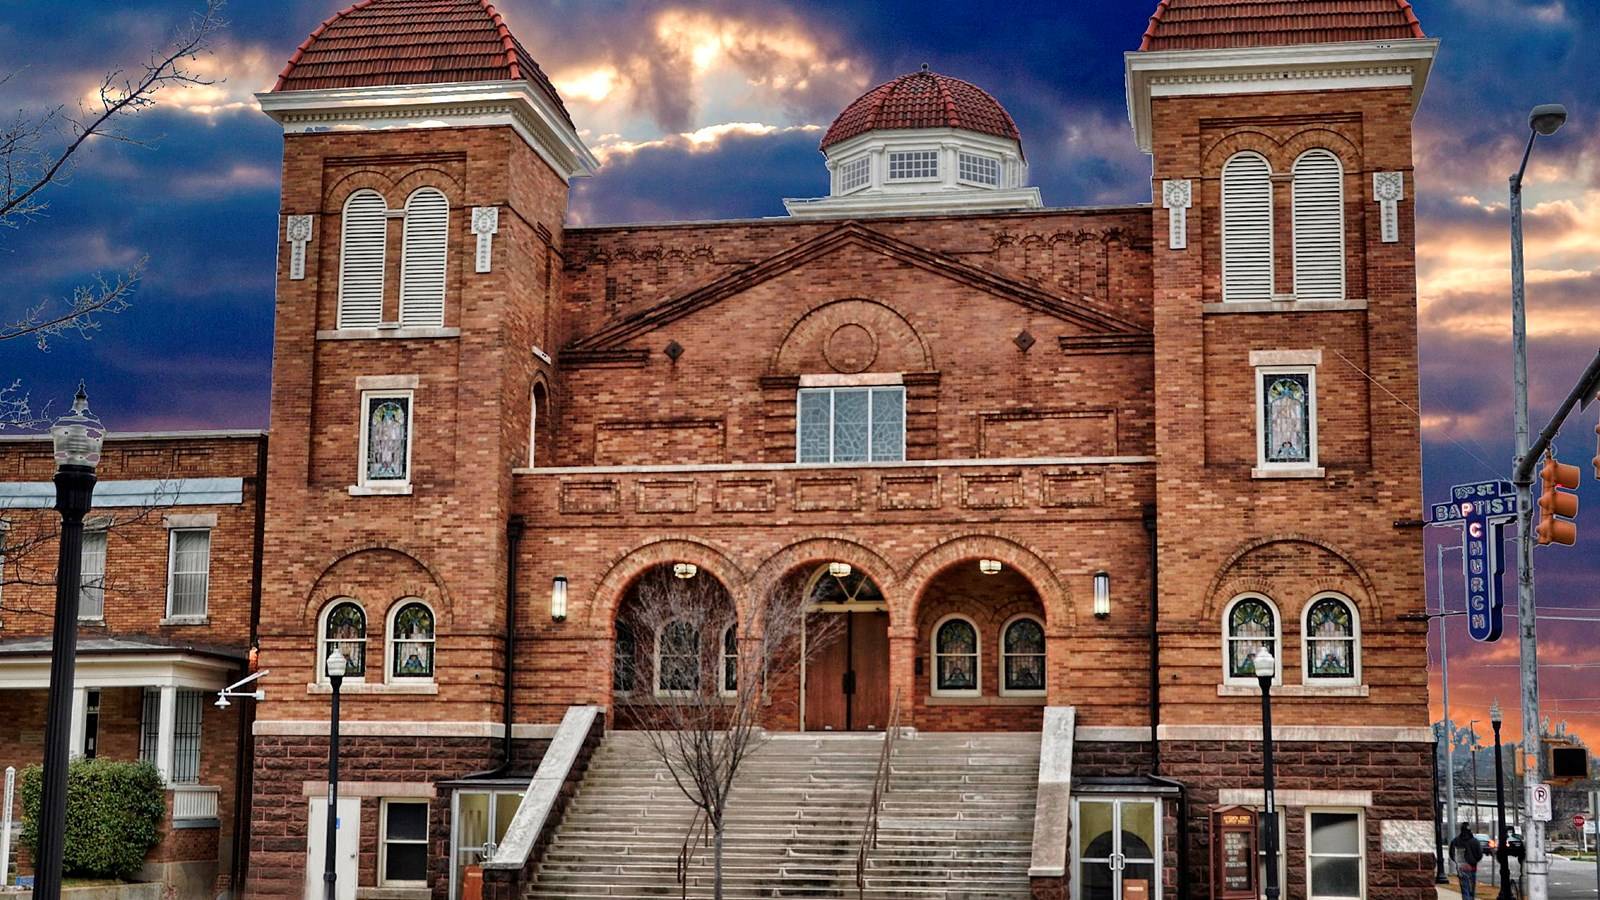 The 16th Street Baptist Church: A Symbol of Hope and Resilience in Birmingham